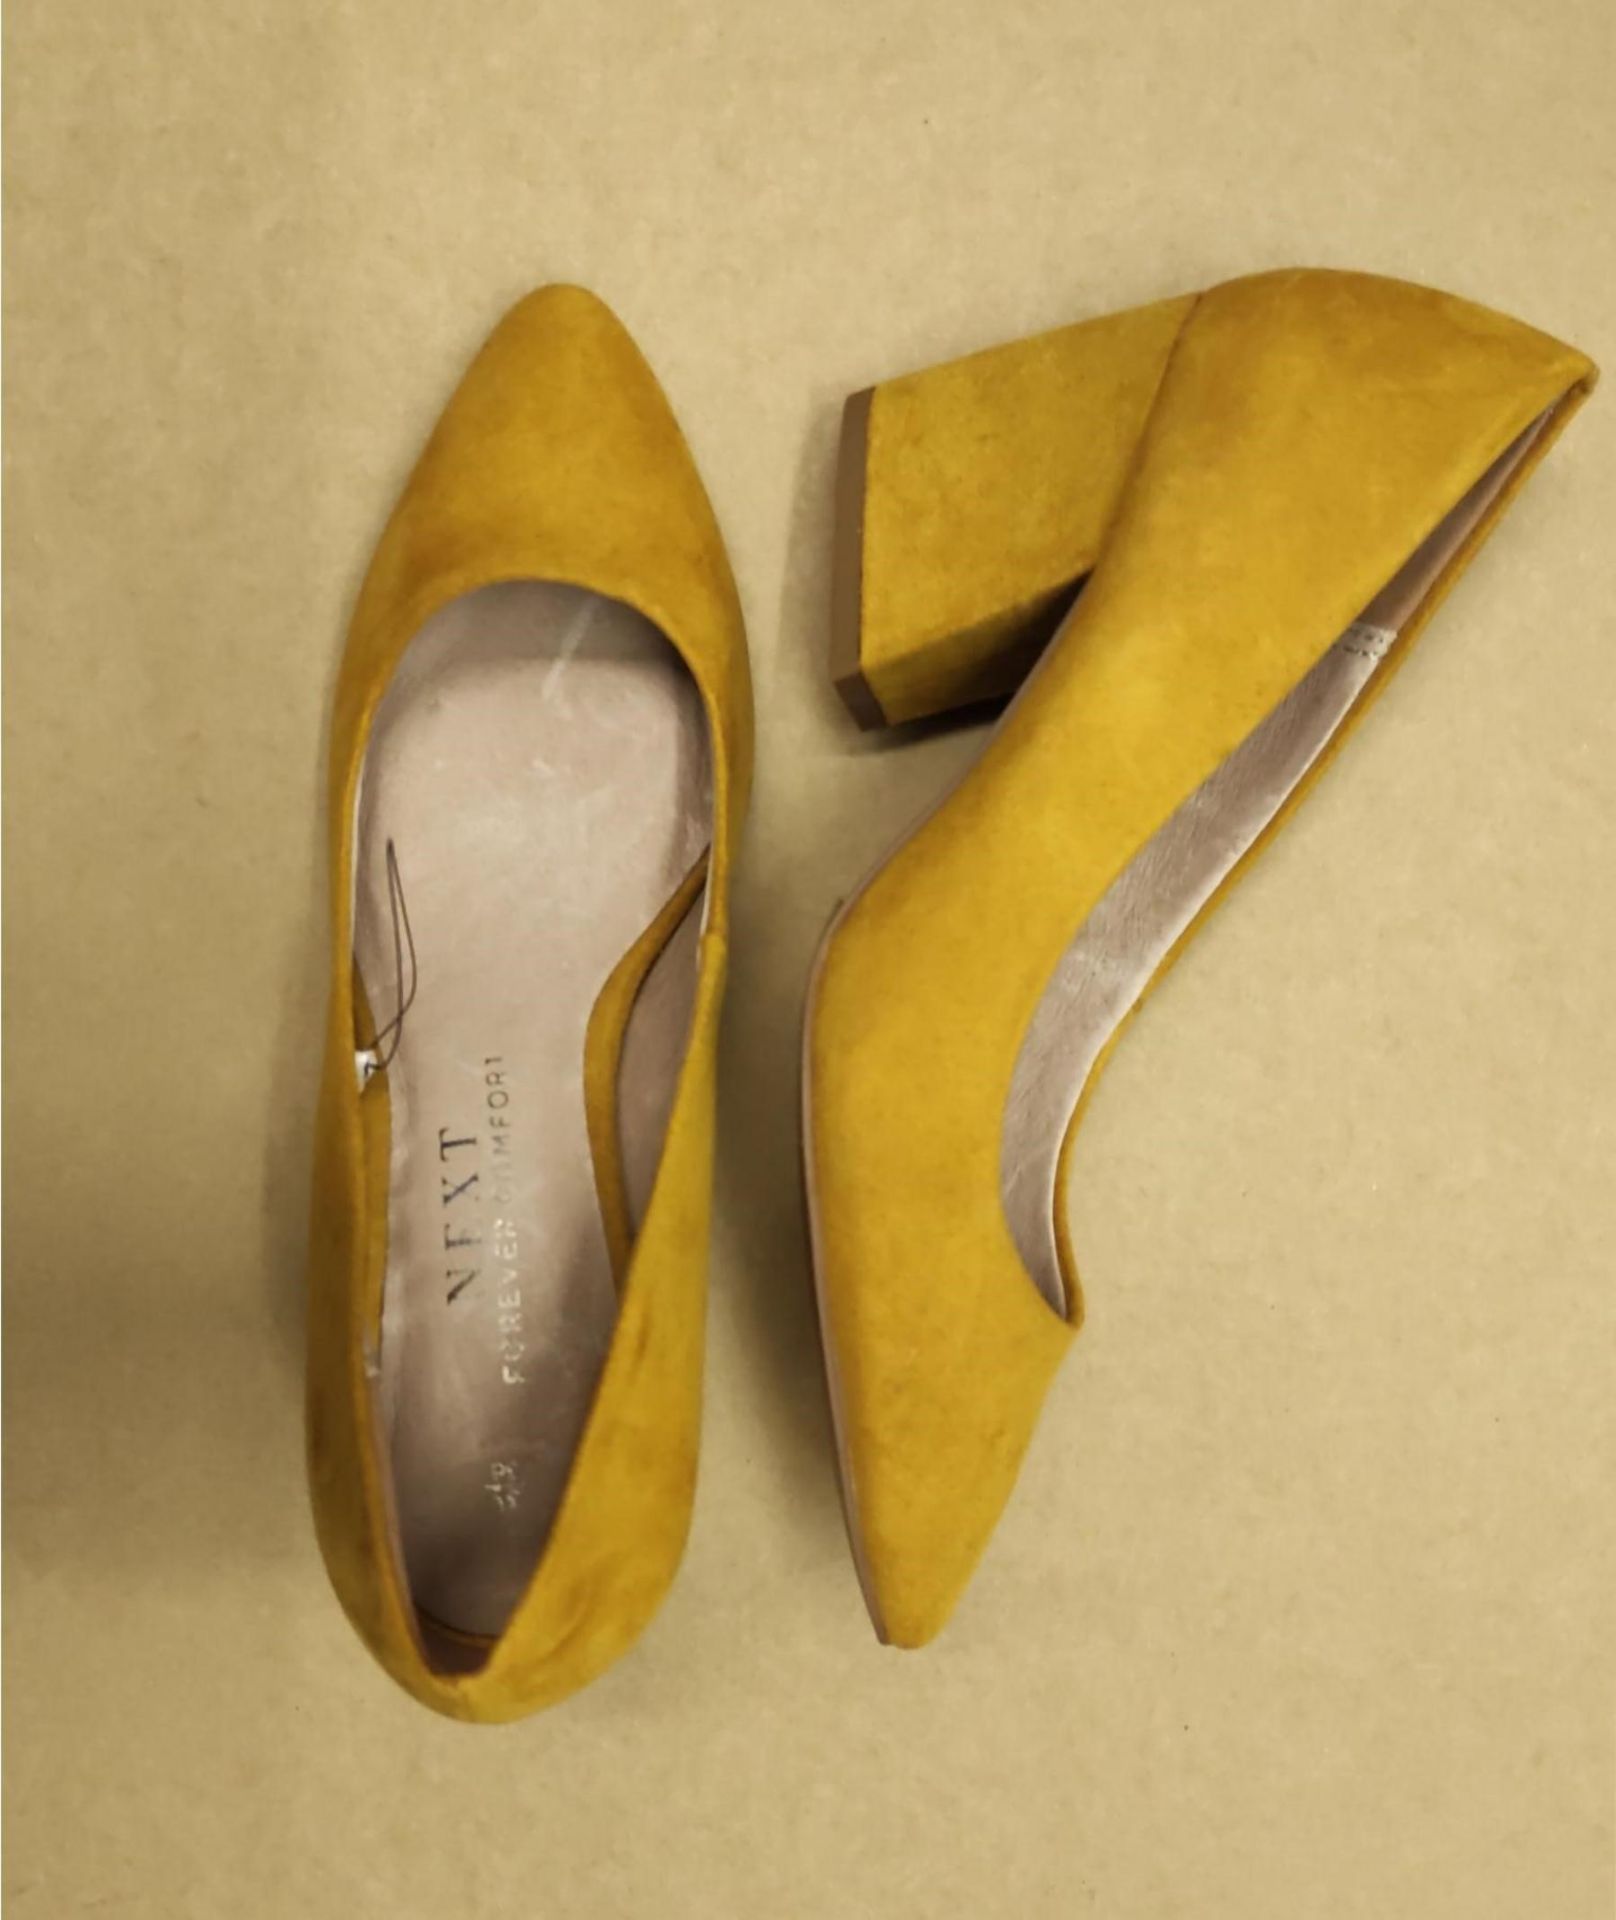 1 X UNBBOXED YELLOW SUEDE KITTEN COURT HEELS SIZE 3.5 £35Condition ReportALL ITEMS ARE BRAND NEW - Image 2 of 2